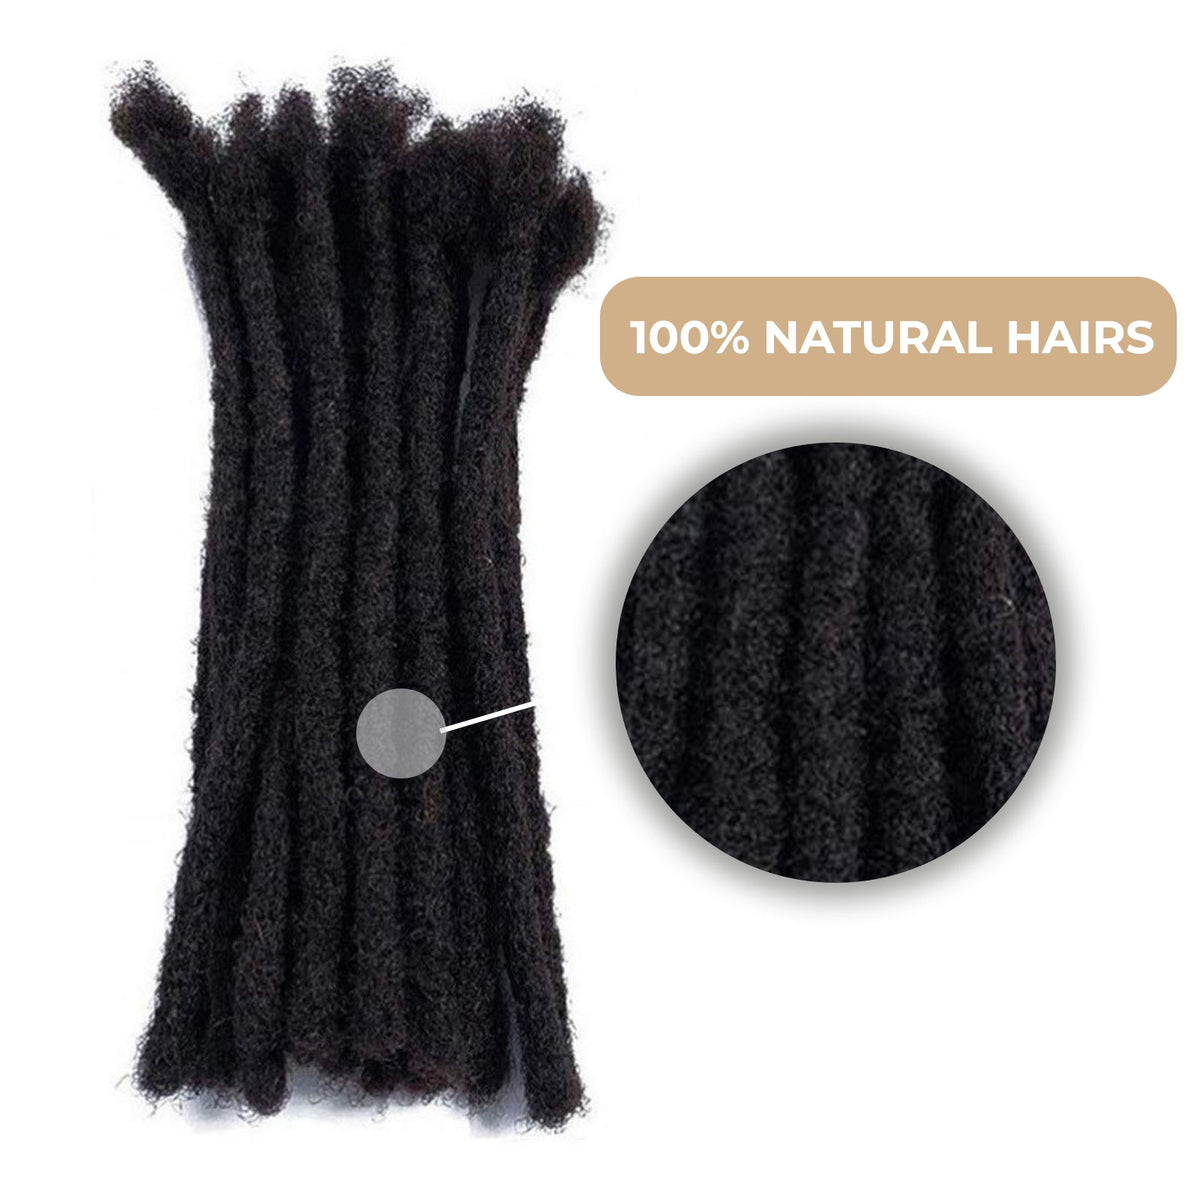 100% Human Hair Dreadlock Extensions 16Inch 10 Strands Handmade Natural Loc Extensions Human Hair Bundle Dreads Extensions For Woman&Men Can be Dyed & Bleached Natural Black 16inch length 0.2cm Width